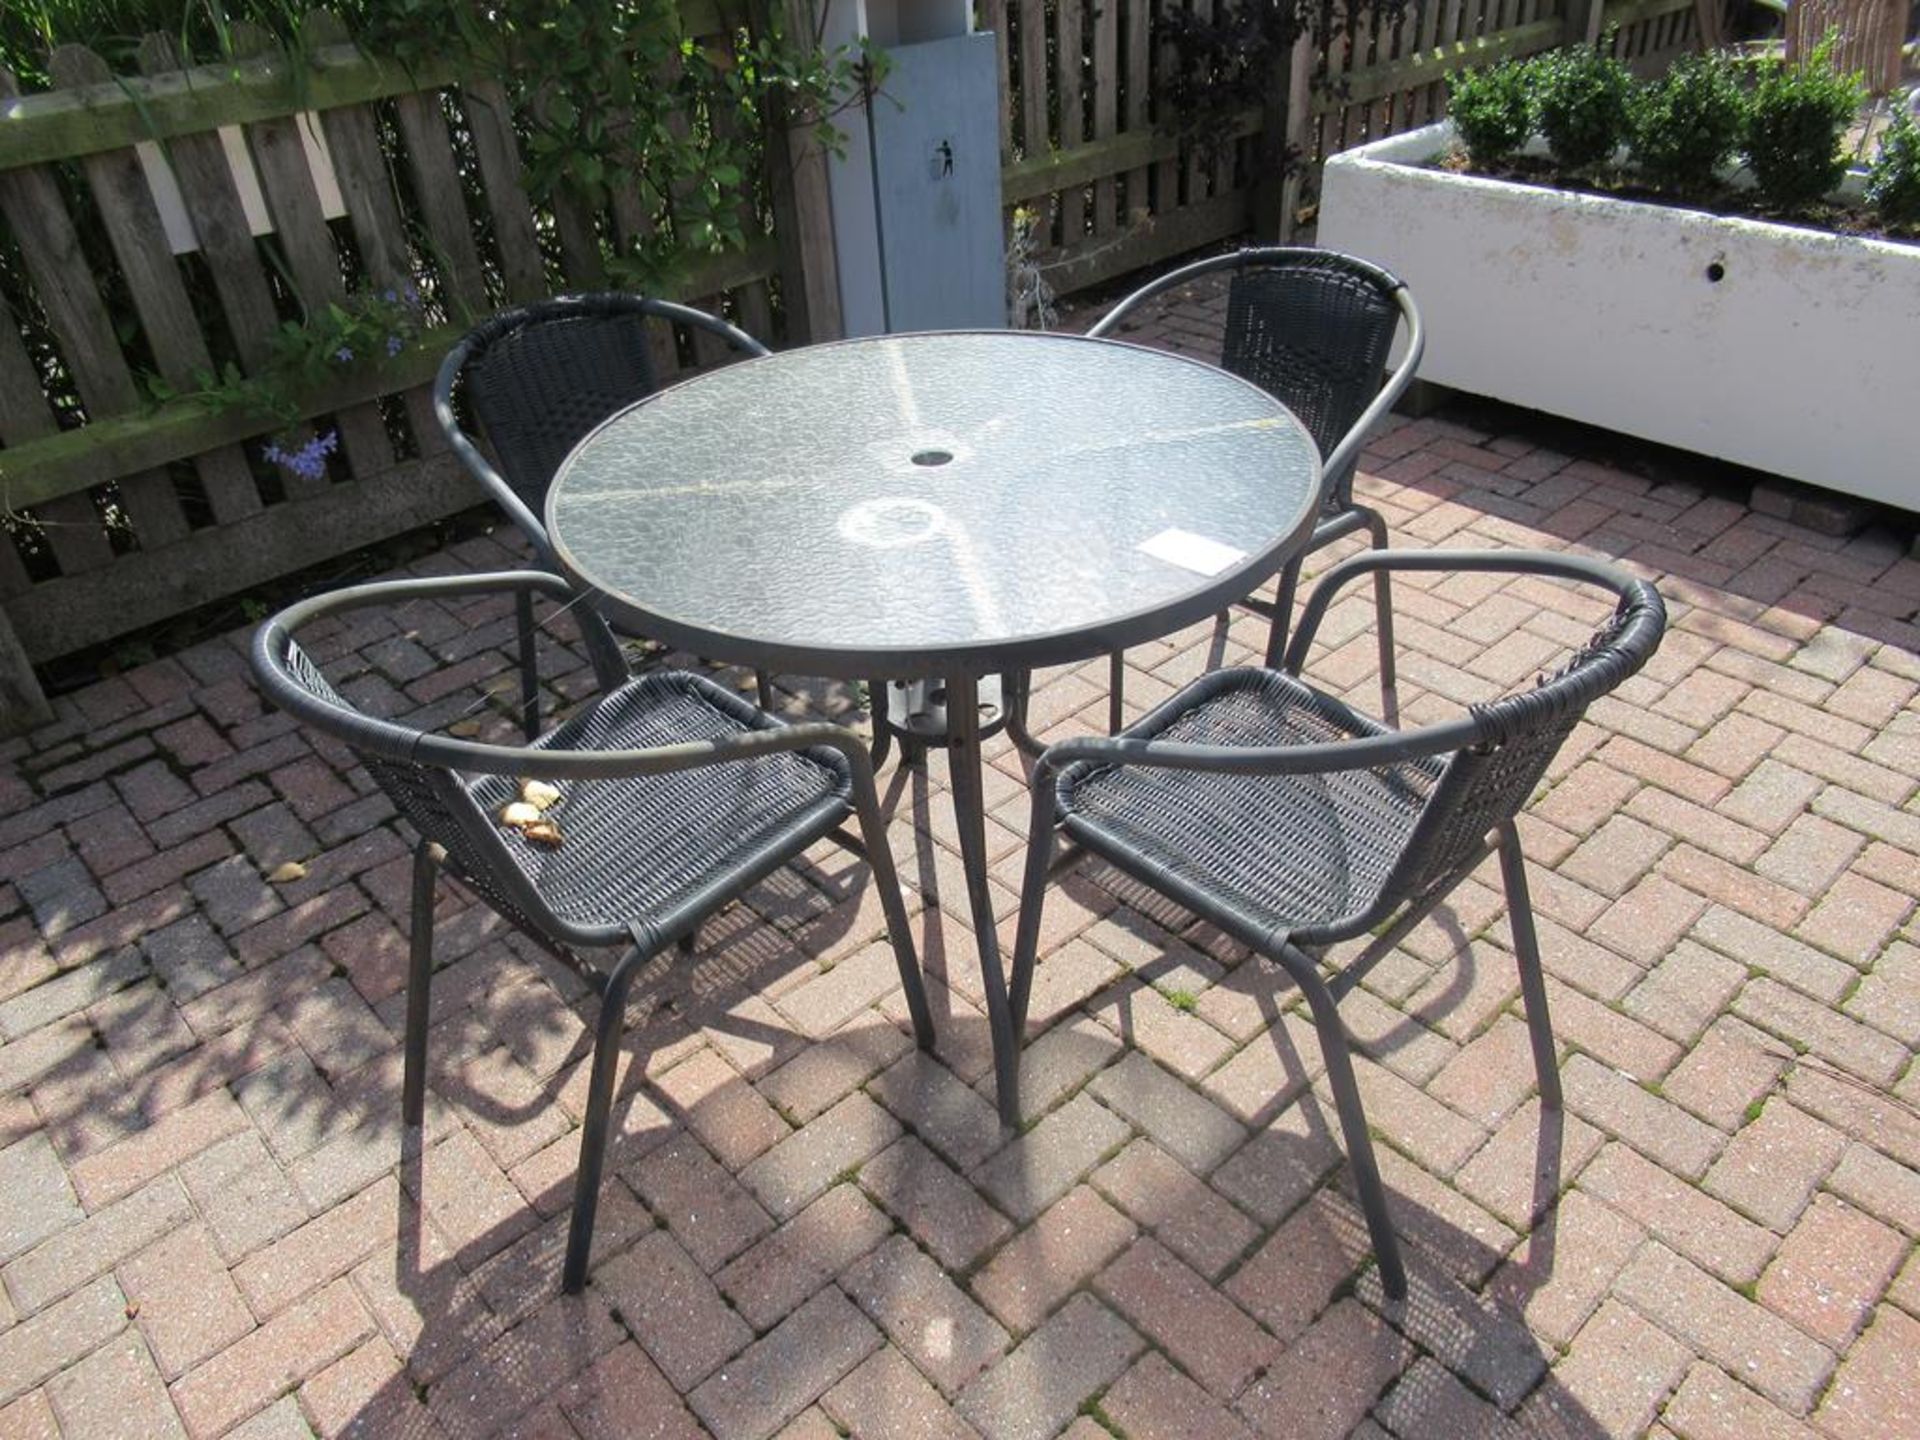 Metal Framed Circular Glass Top Garden Table and 4 x Matching Garden Chairs - Image 2 of 2